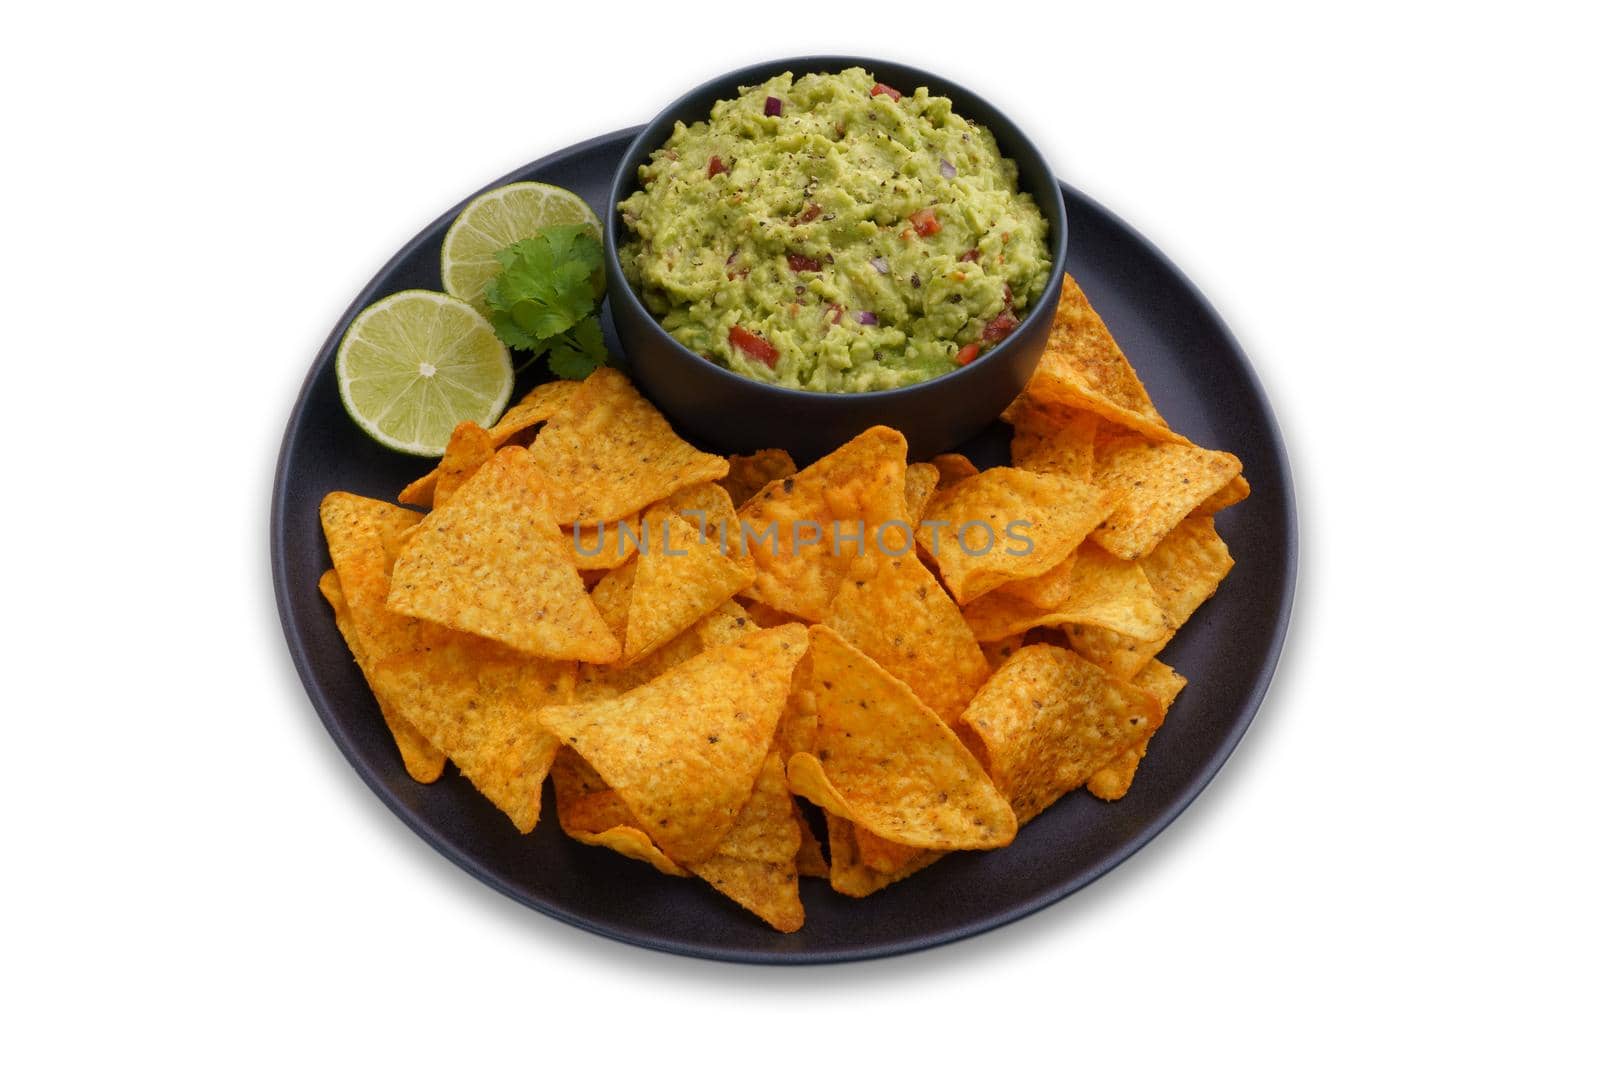 Black plate of guacamole dip and tortilla chips or nachos isolated on a white background by DariaKulkova